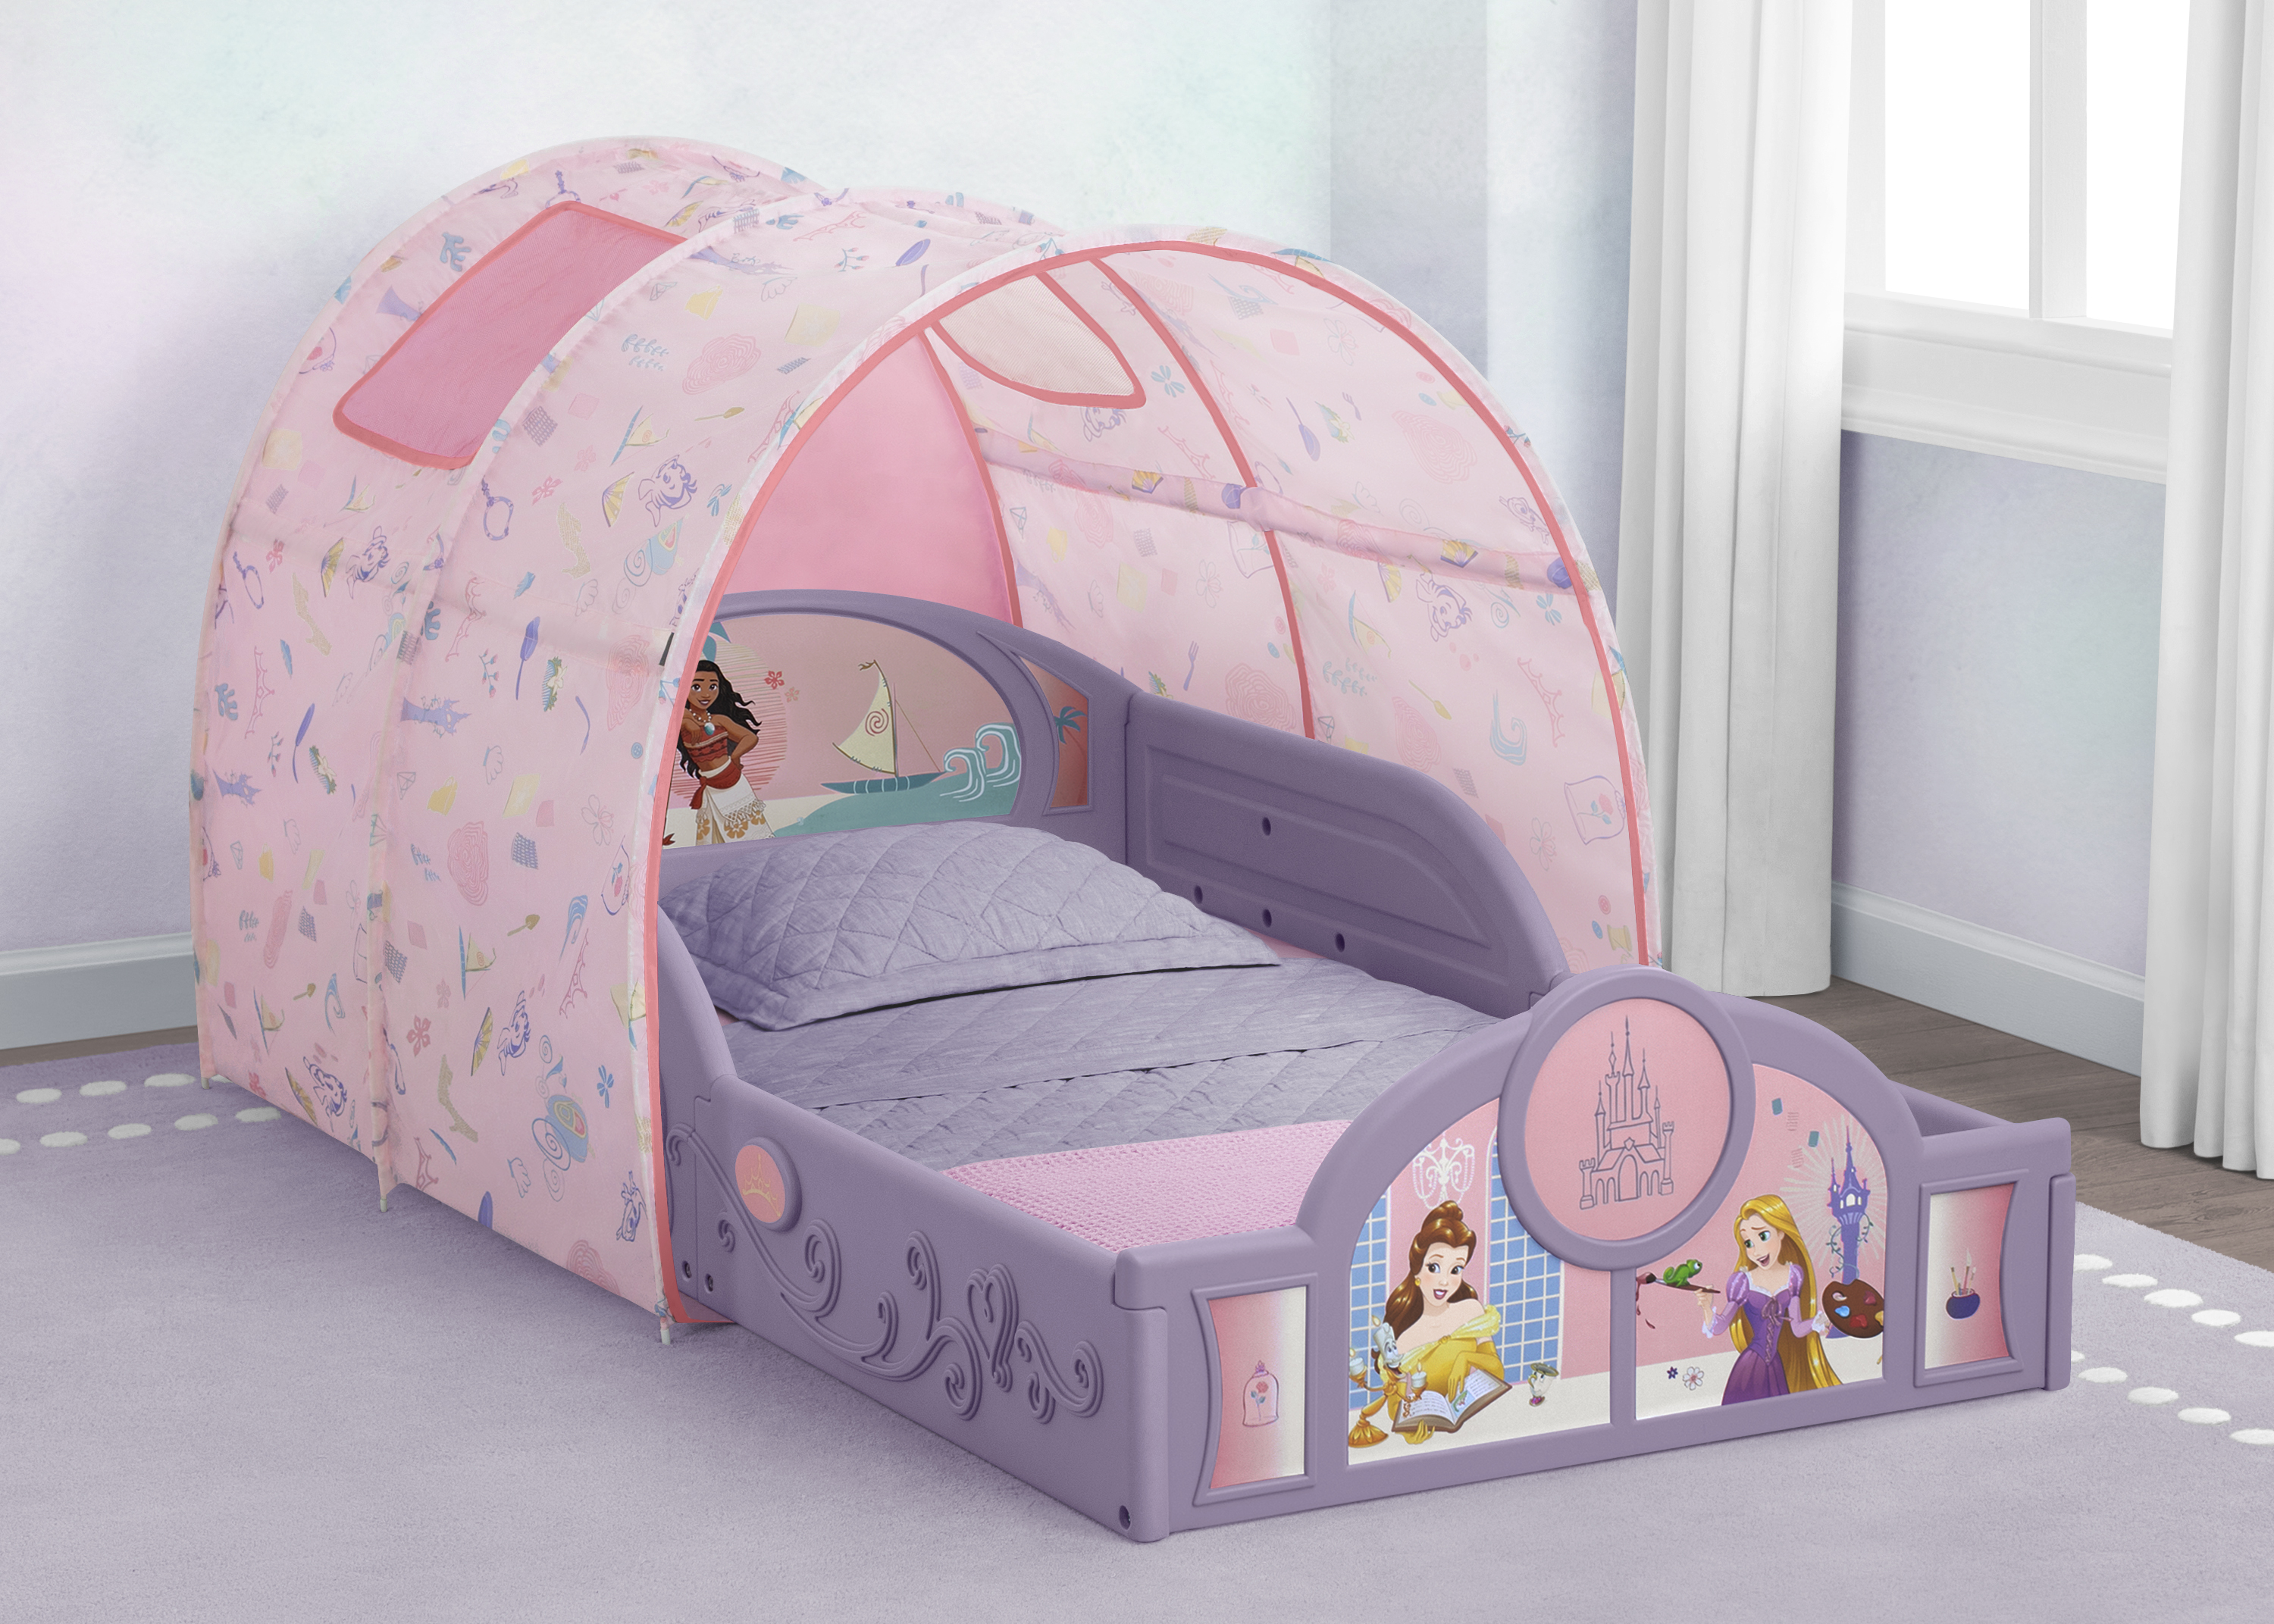 Disney Princess Sleep and Play Toddler Bed with Tent by Delta Children, Purple/Pink - image 2 of 7